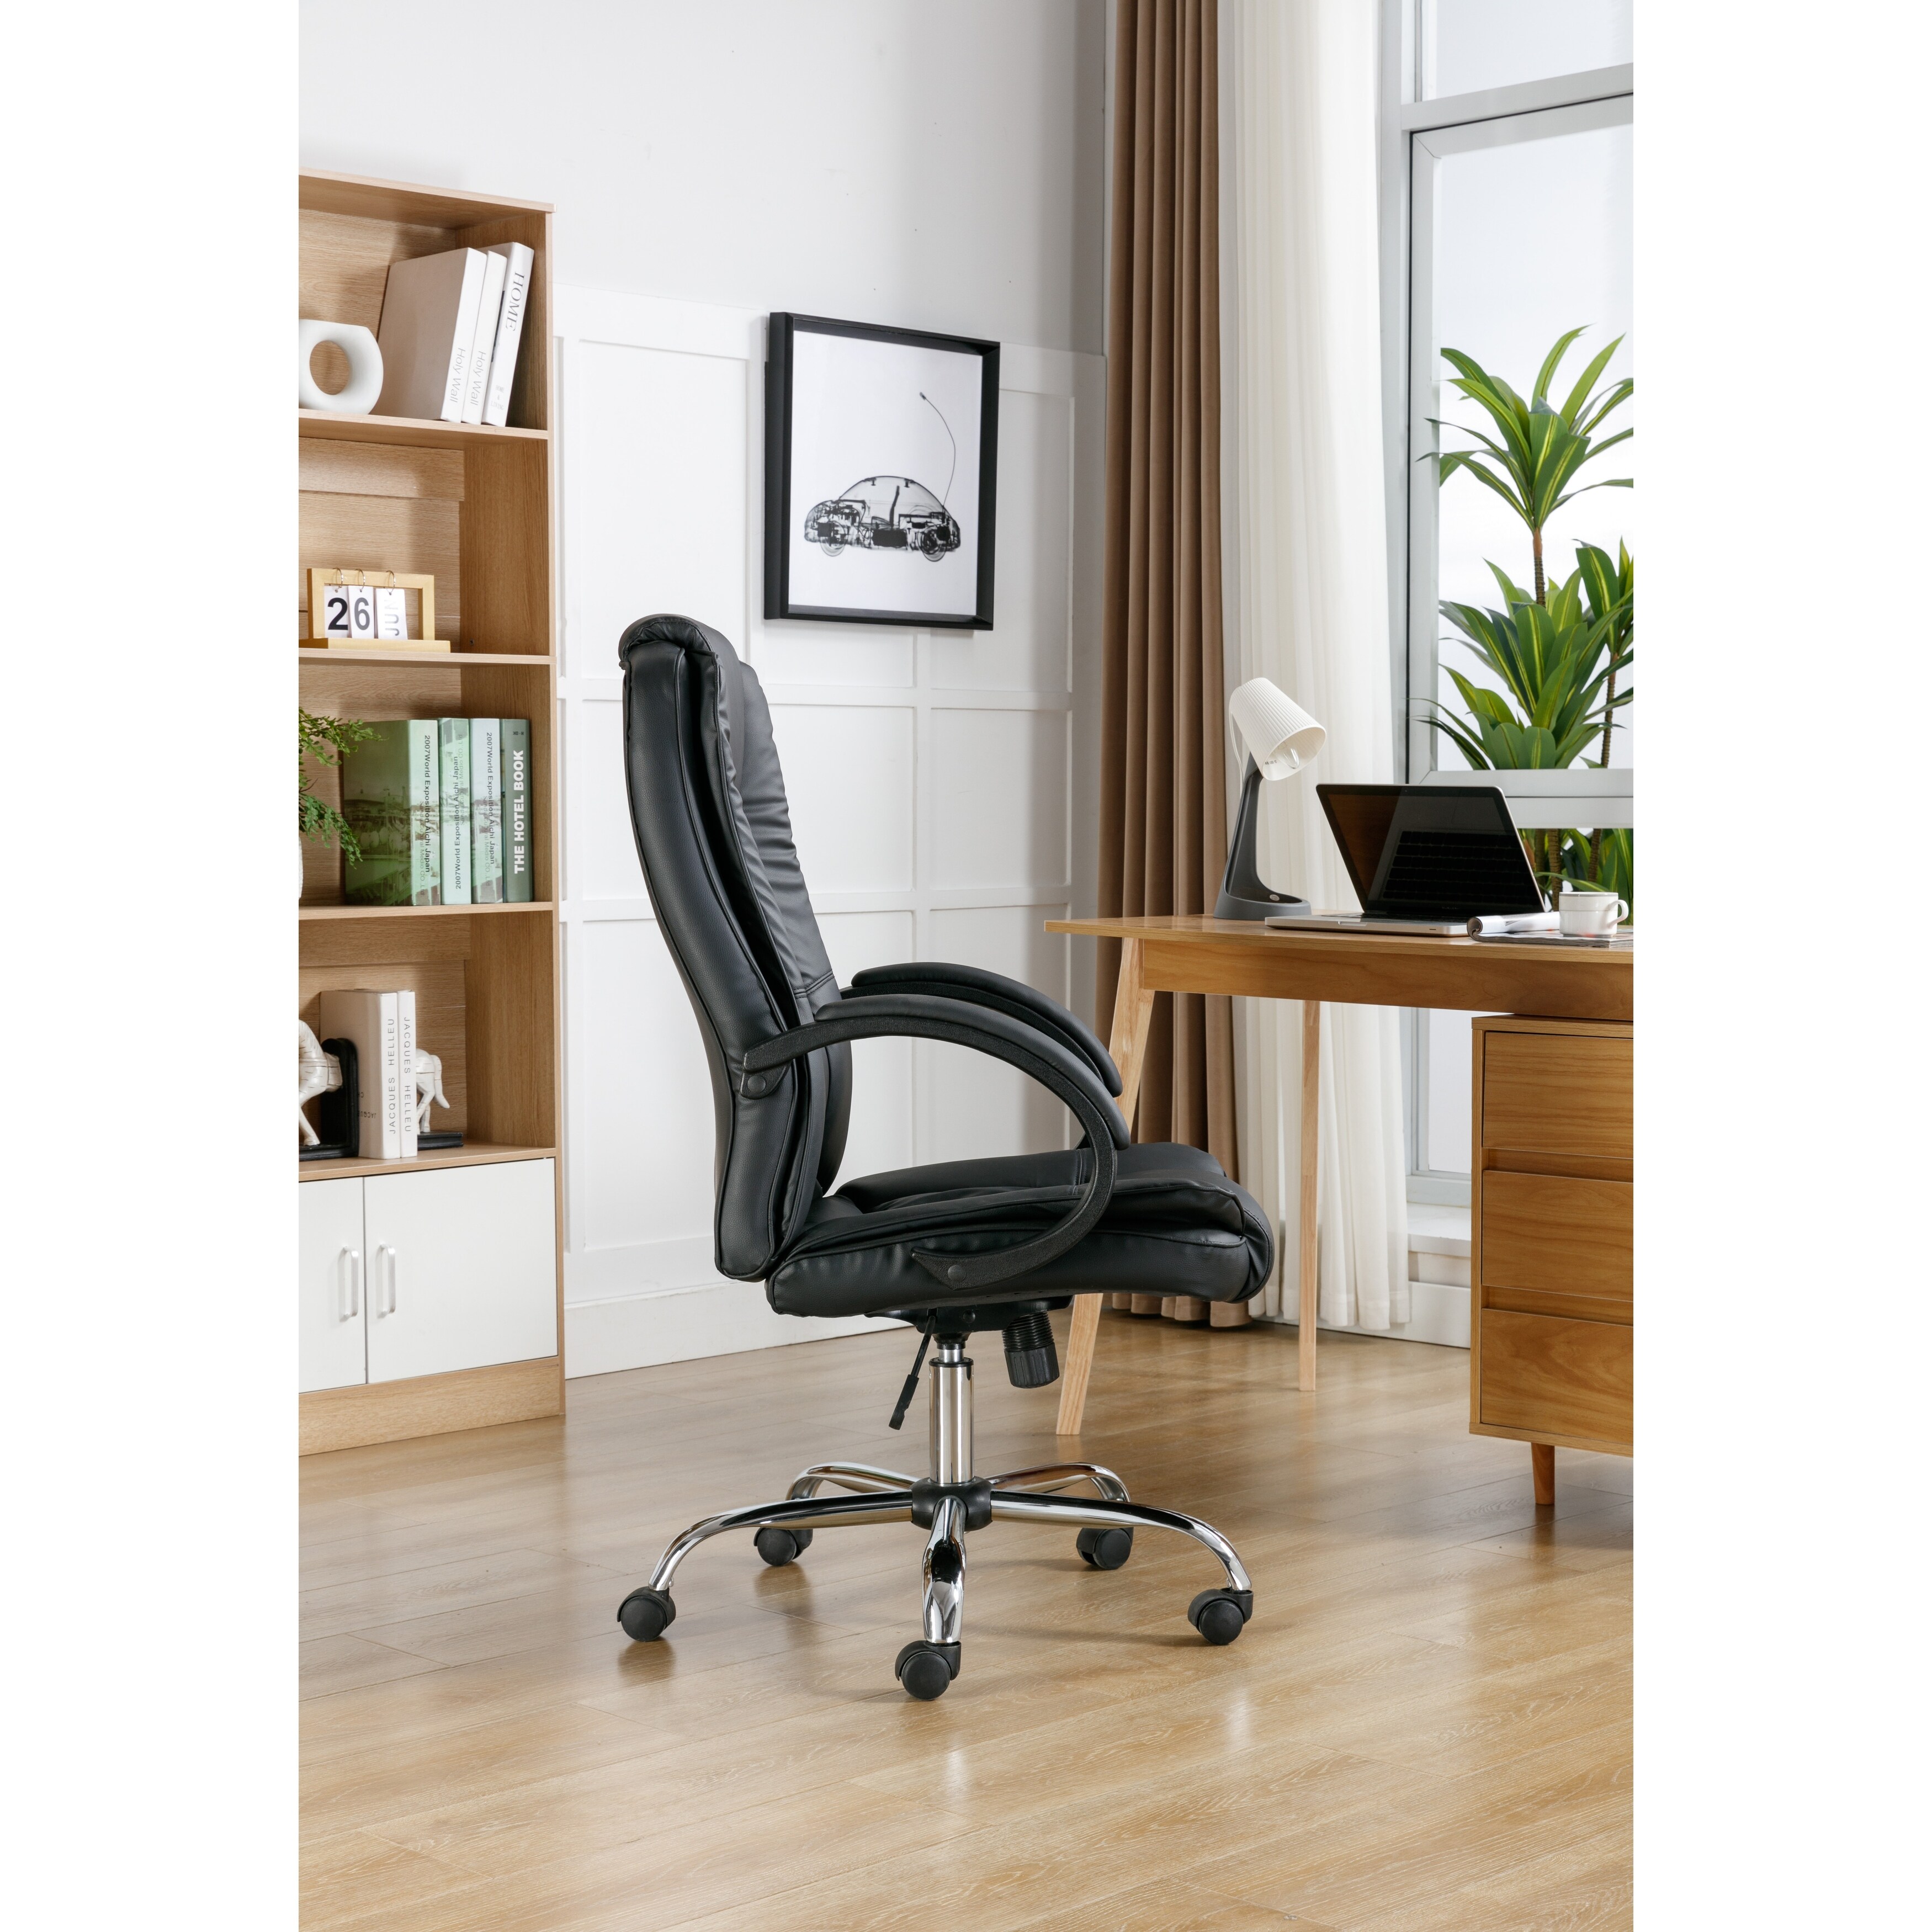 Charles Executive Office Chair - Black